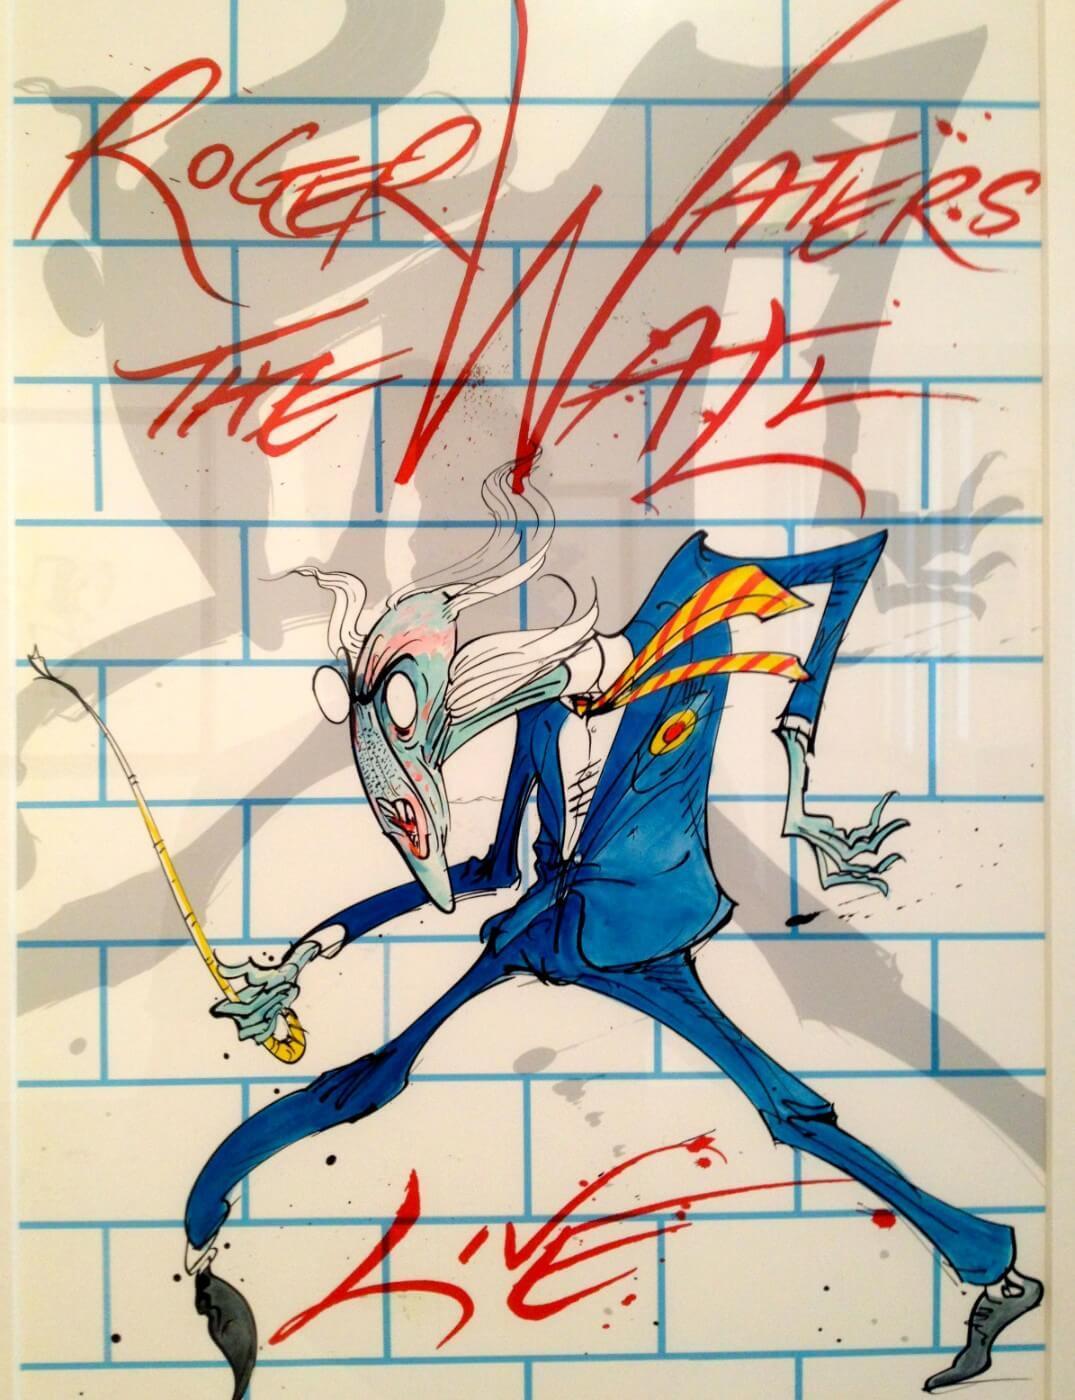 pink floyd the wall poster